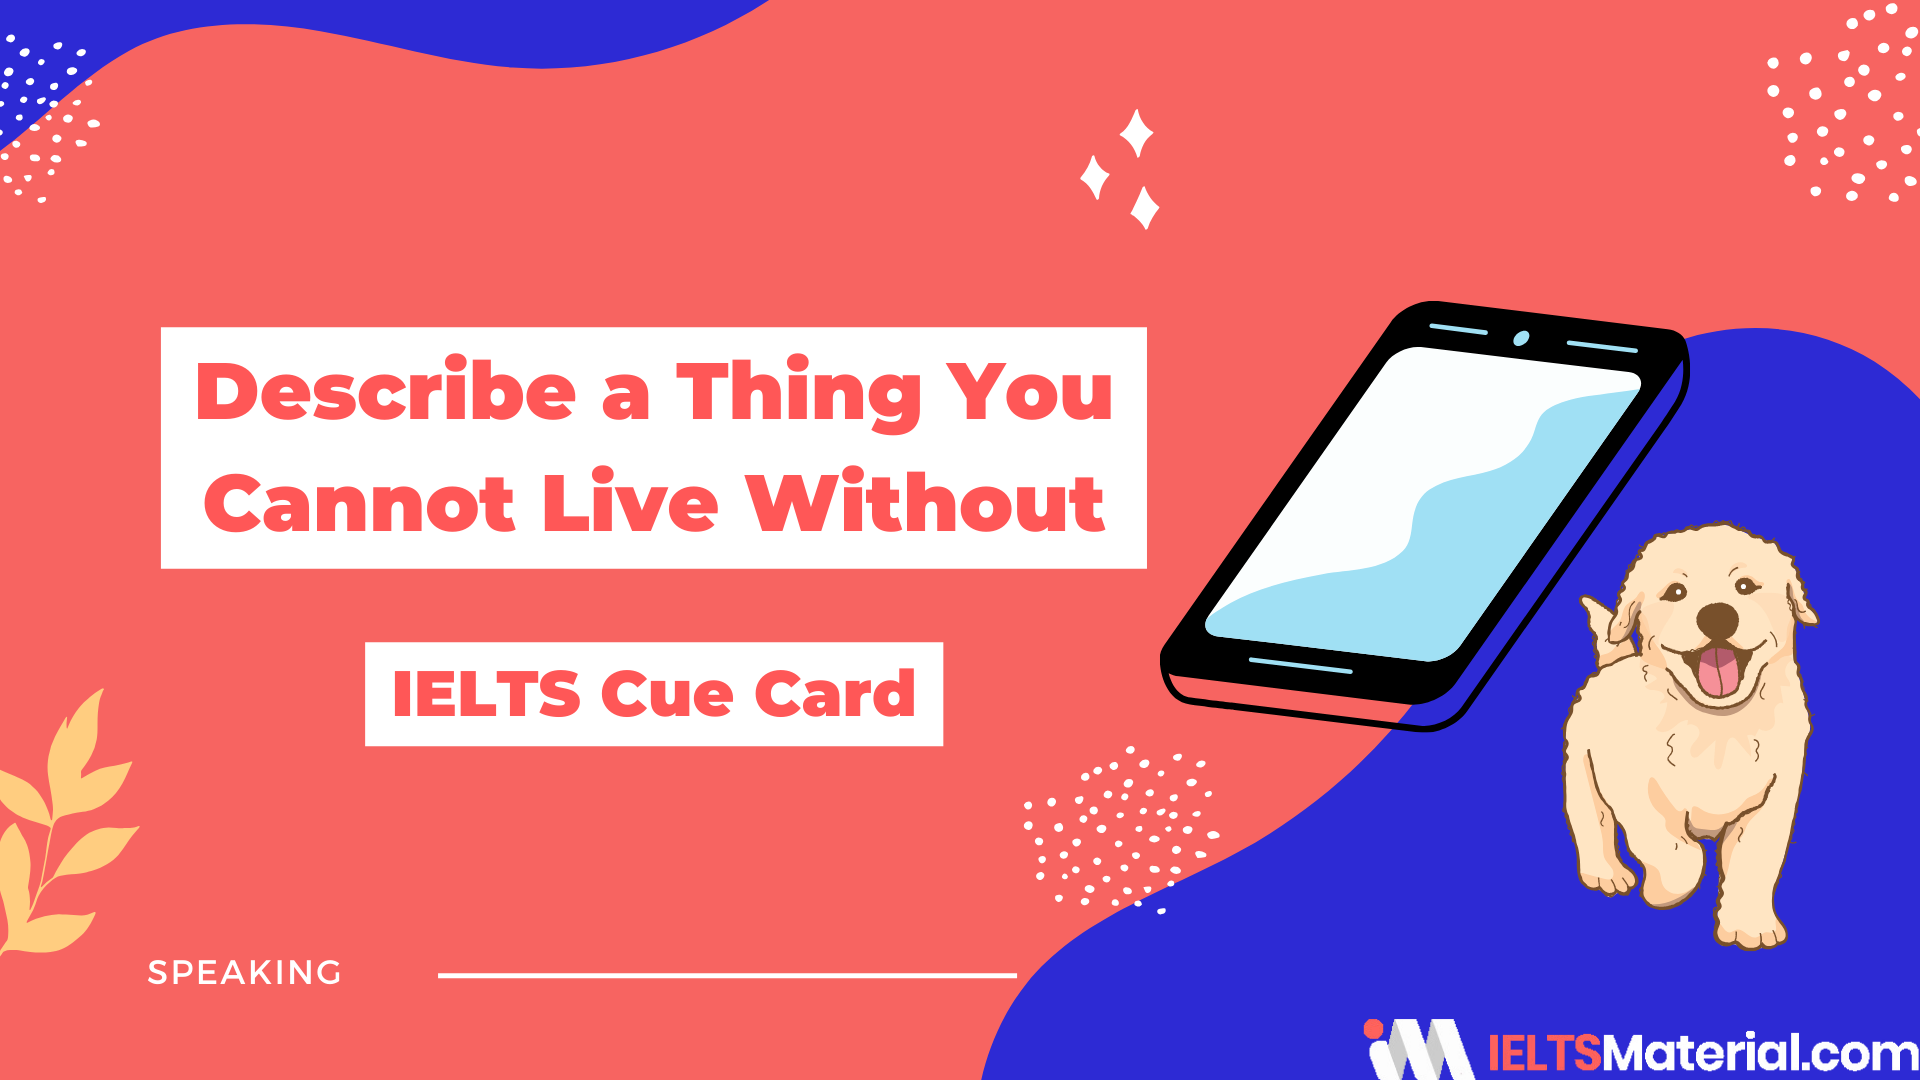 Describe a Thing You Cannot Live Without – IELTS Cue Card